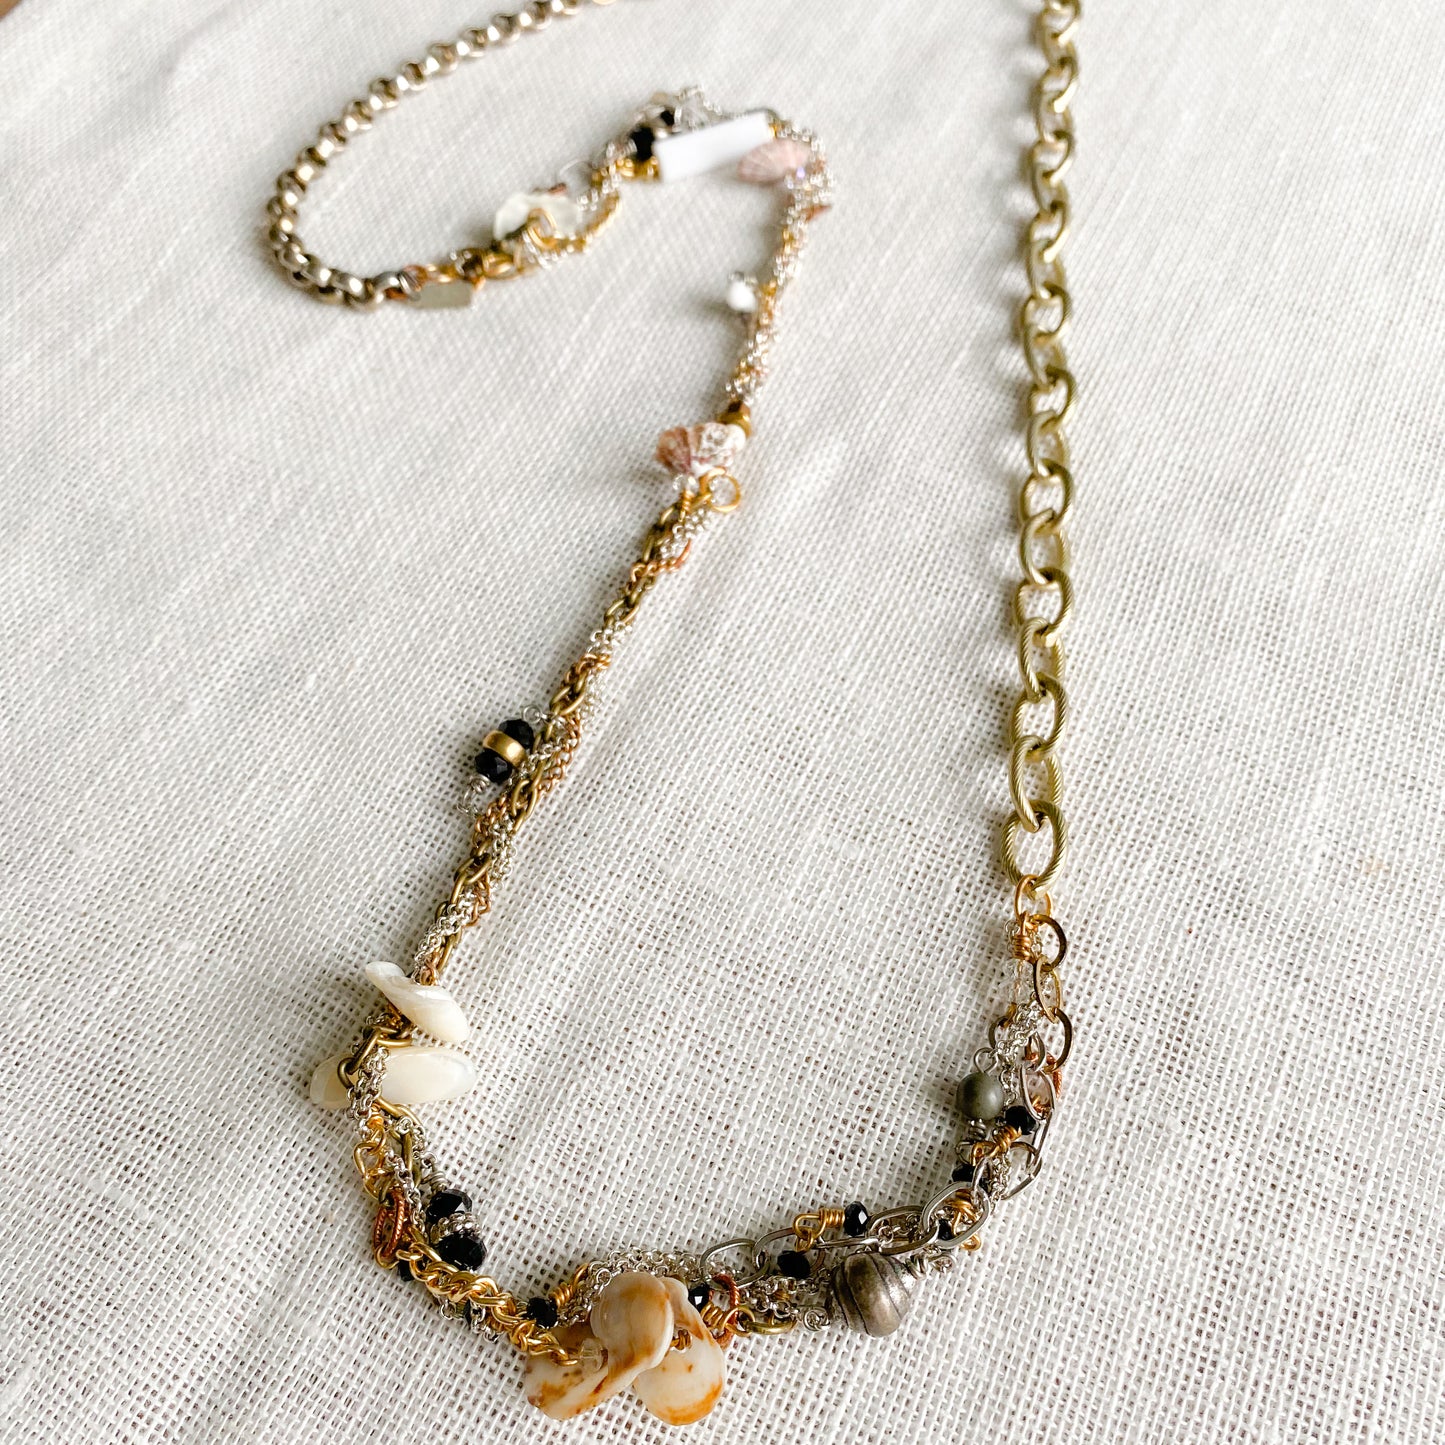 Mother of Pearl Braided Chain Necklace - BelleStyle